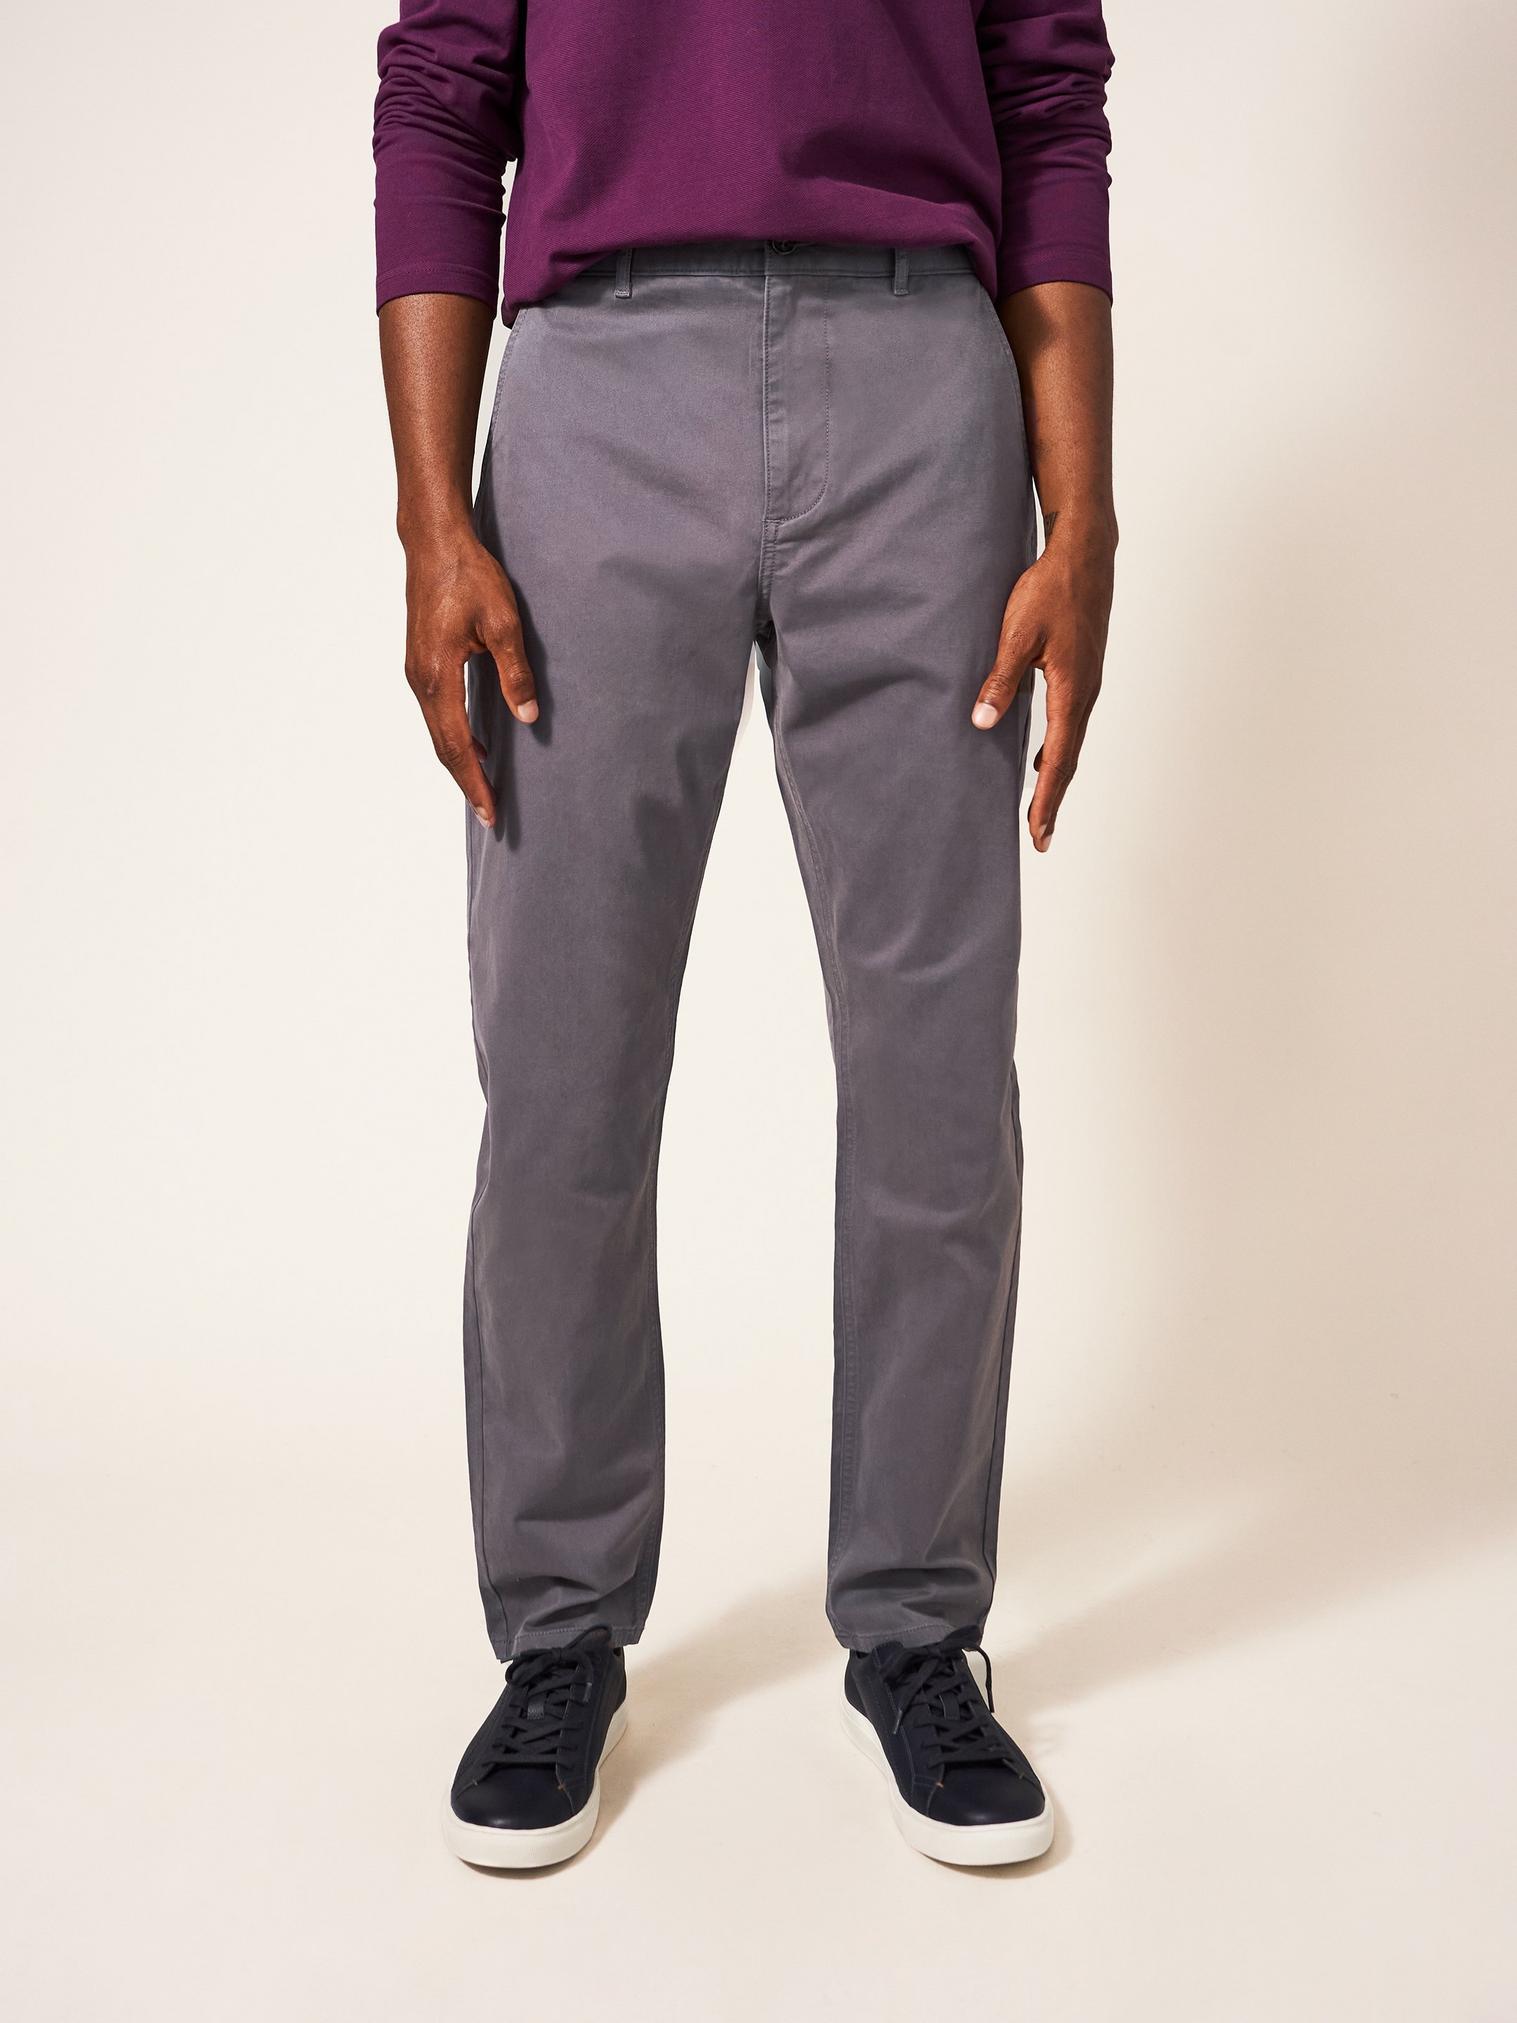 Elm Chino Trouser in MID GREY - LIFESTYLE